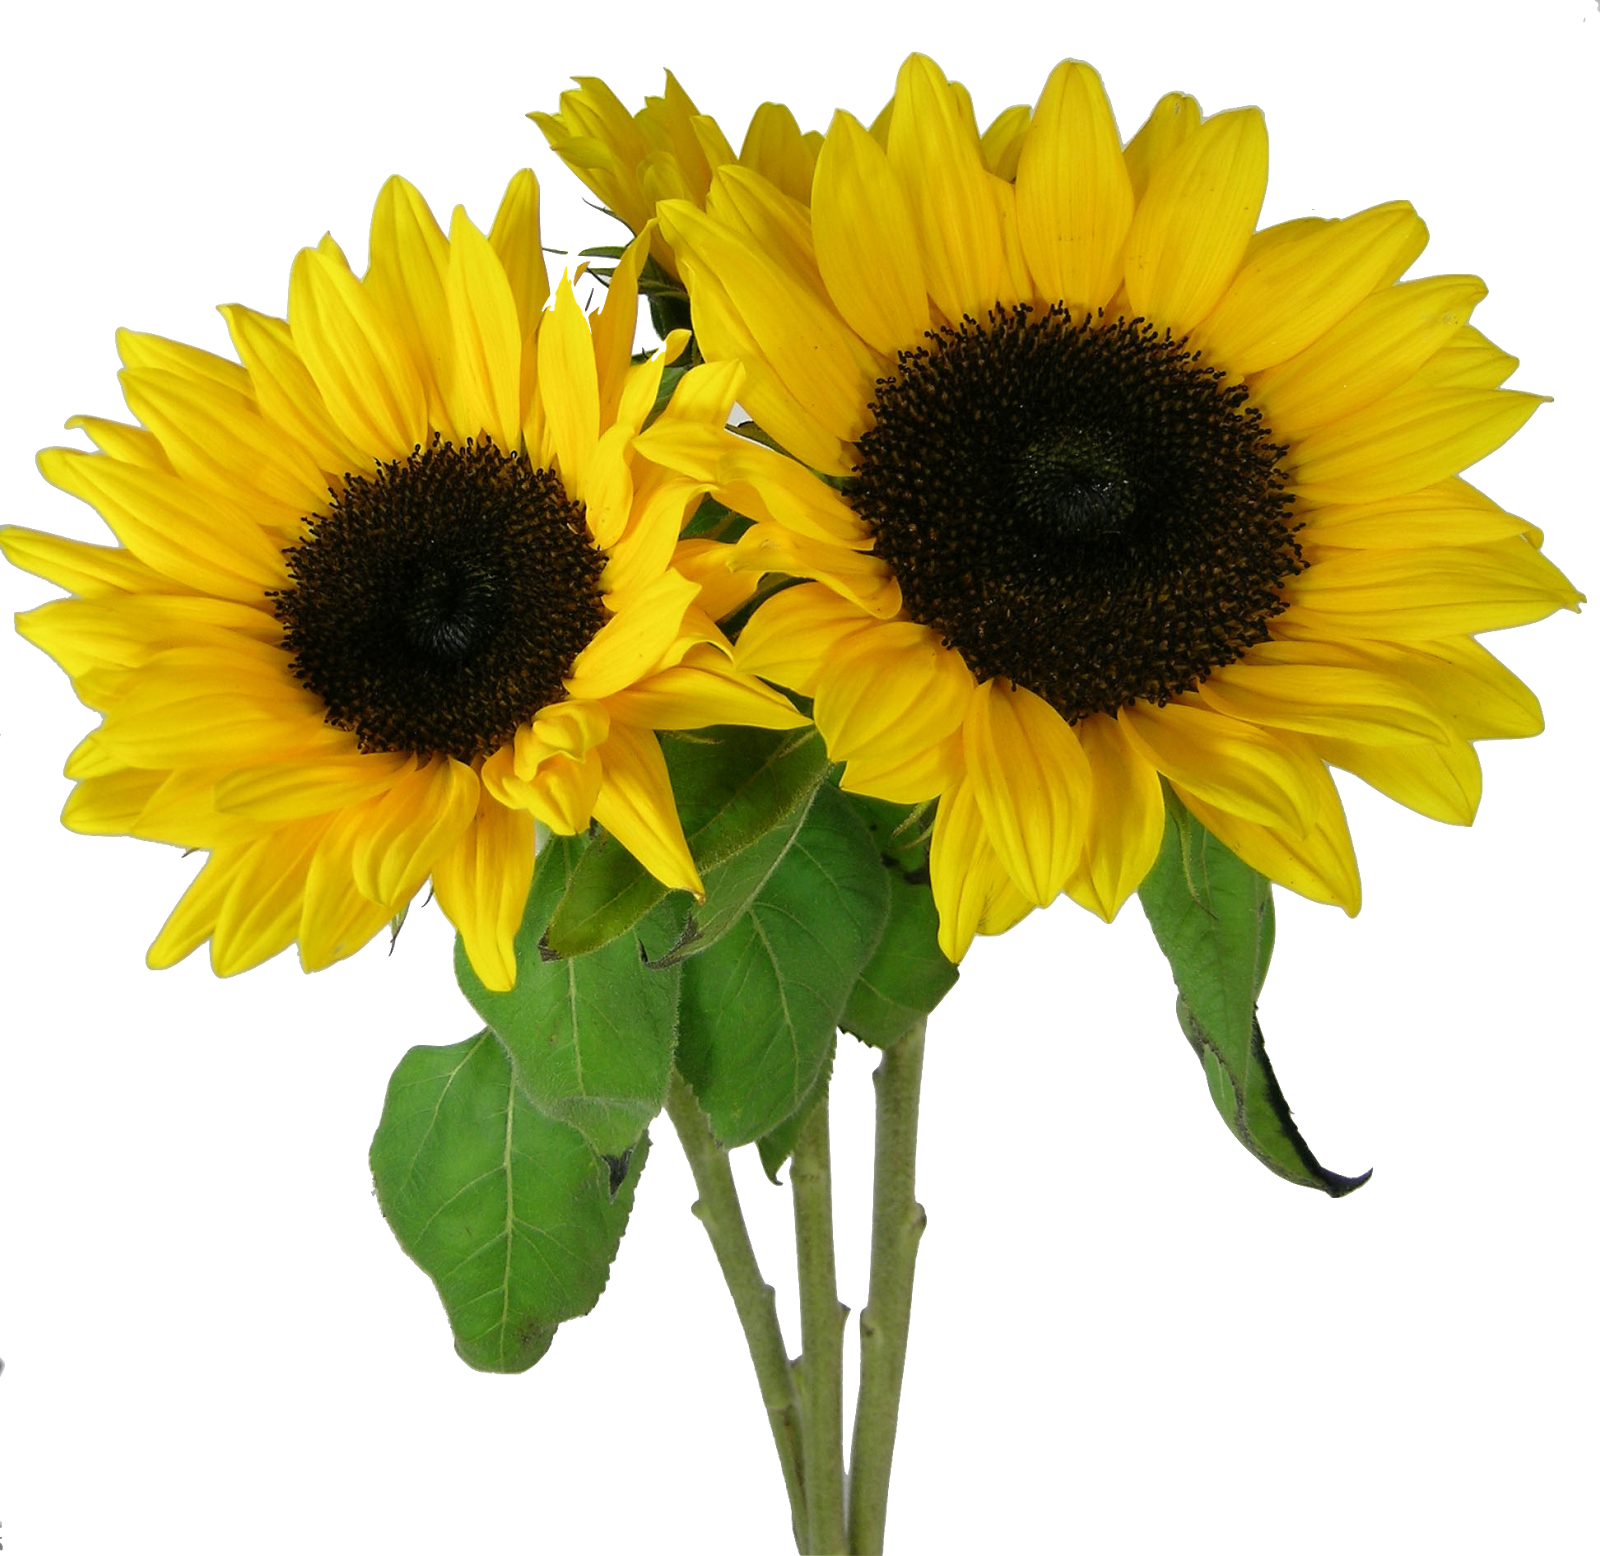 Sunflower PNG Background Image